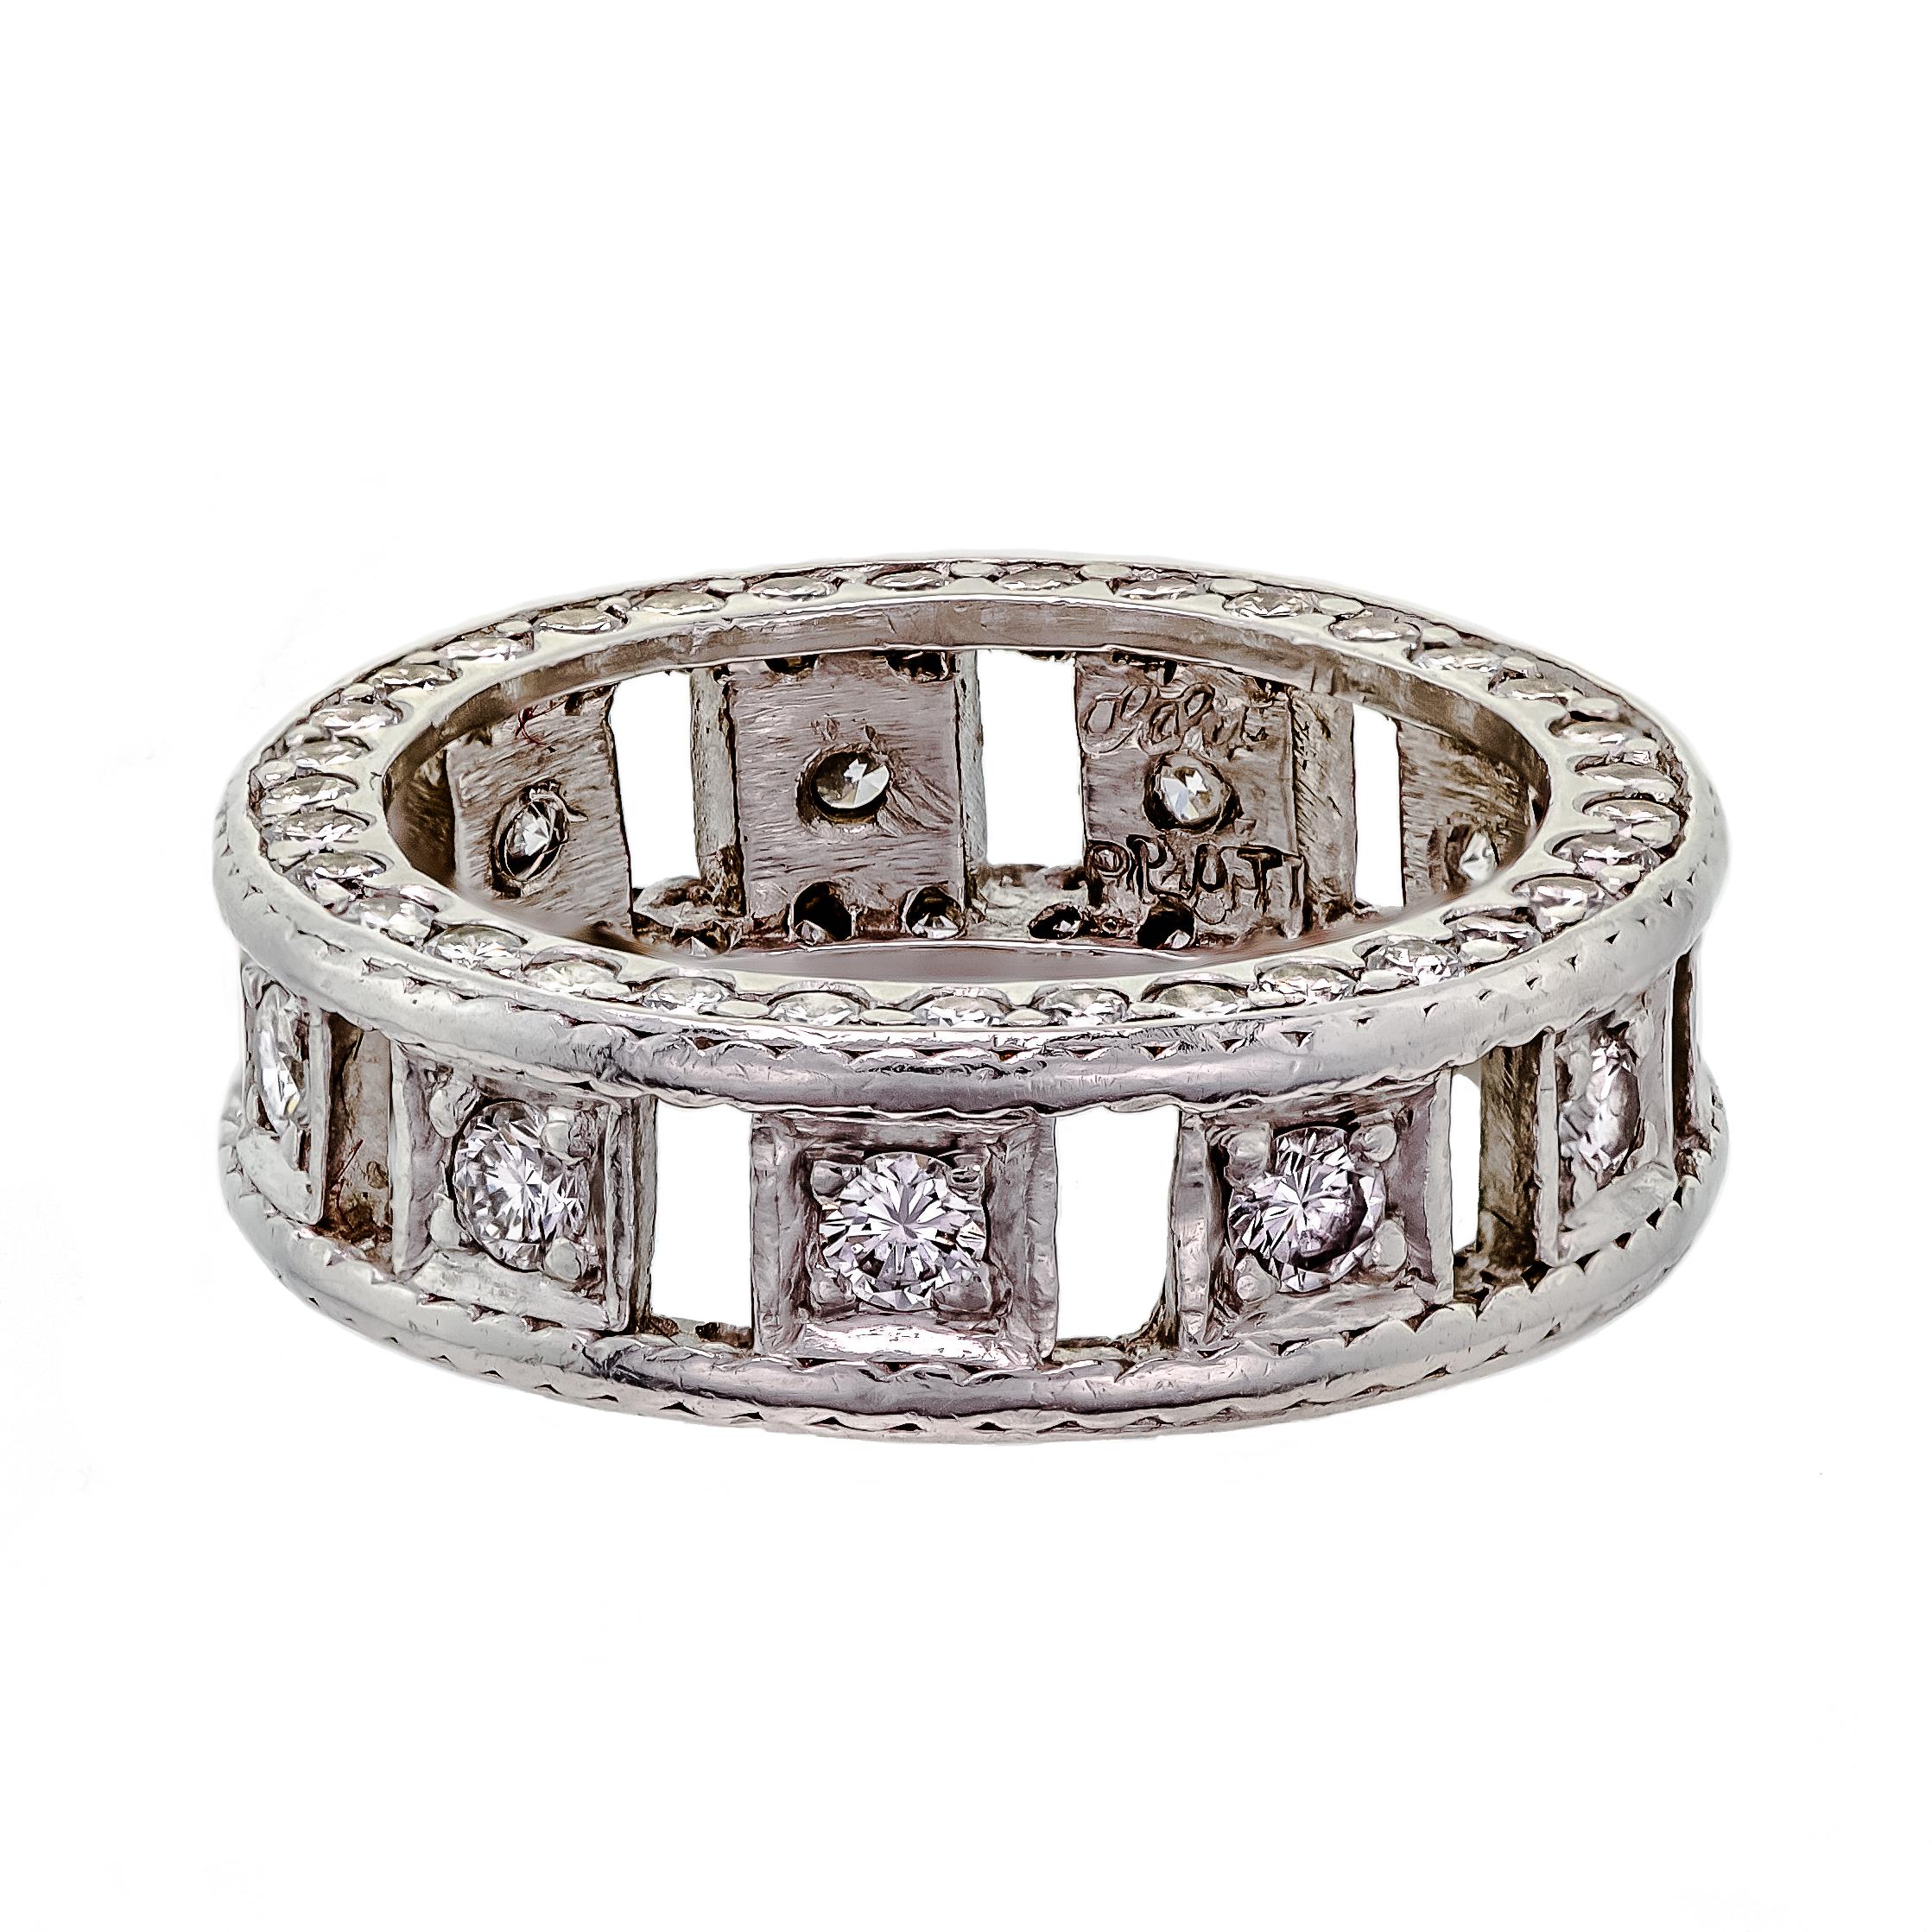 Diamond and platinum eternity band. Open platinum eternity band set with round brilliant cut diamonds on the top and sides. Total Estimated Diamond Weight 1.50ct

Size: 5-1/2 -3/4